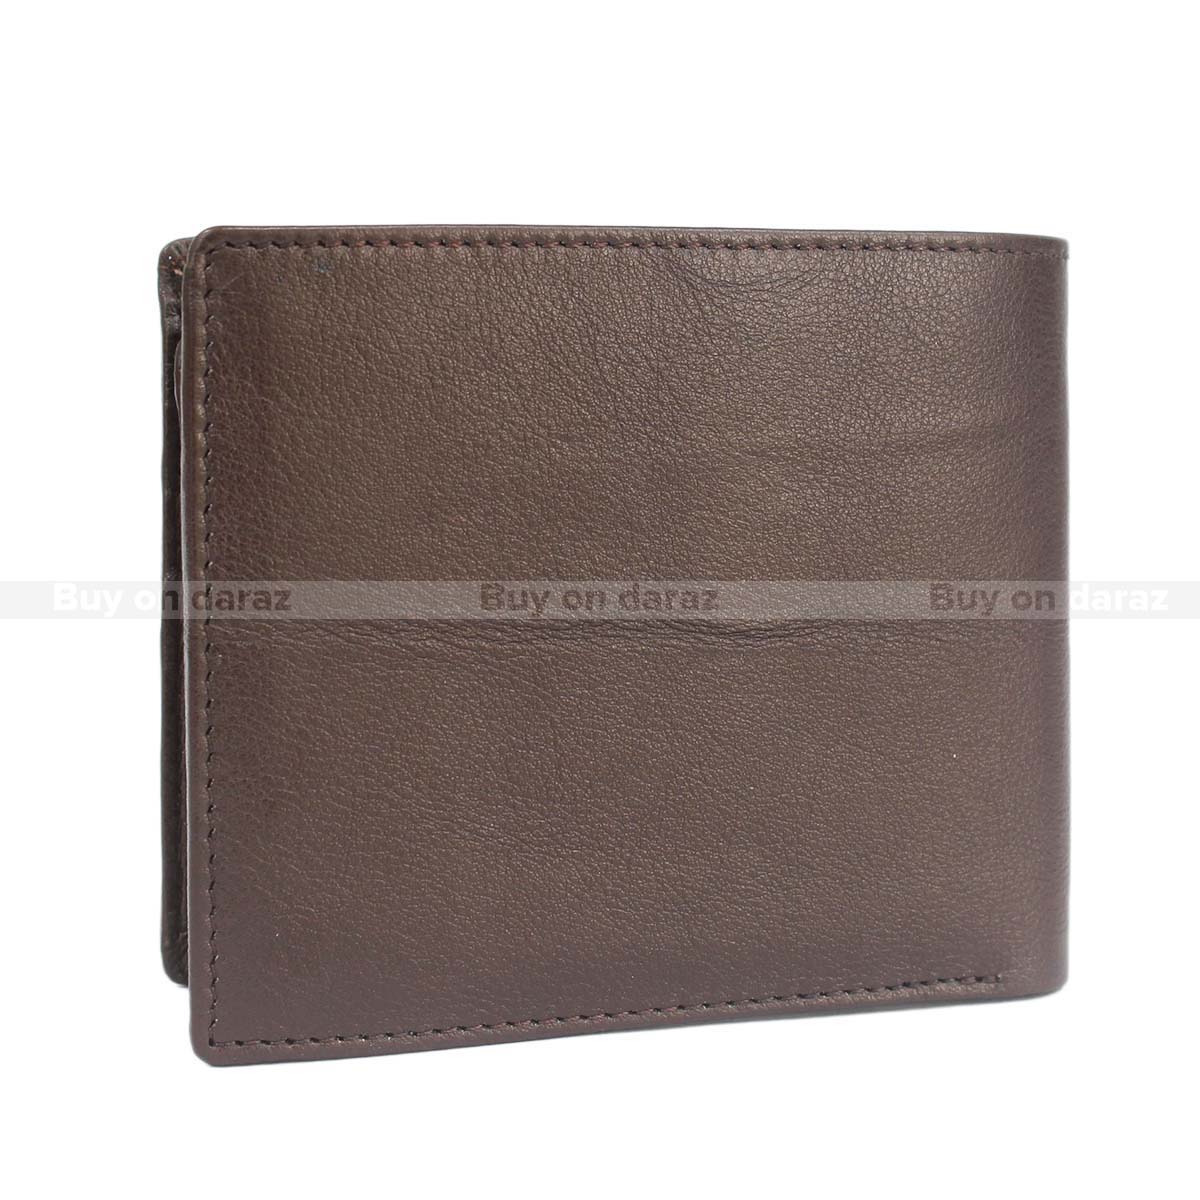 Zam zam leather goods & luggage bags - Leather Goods Shop in Banjara Hills